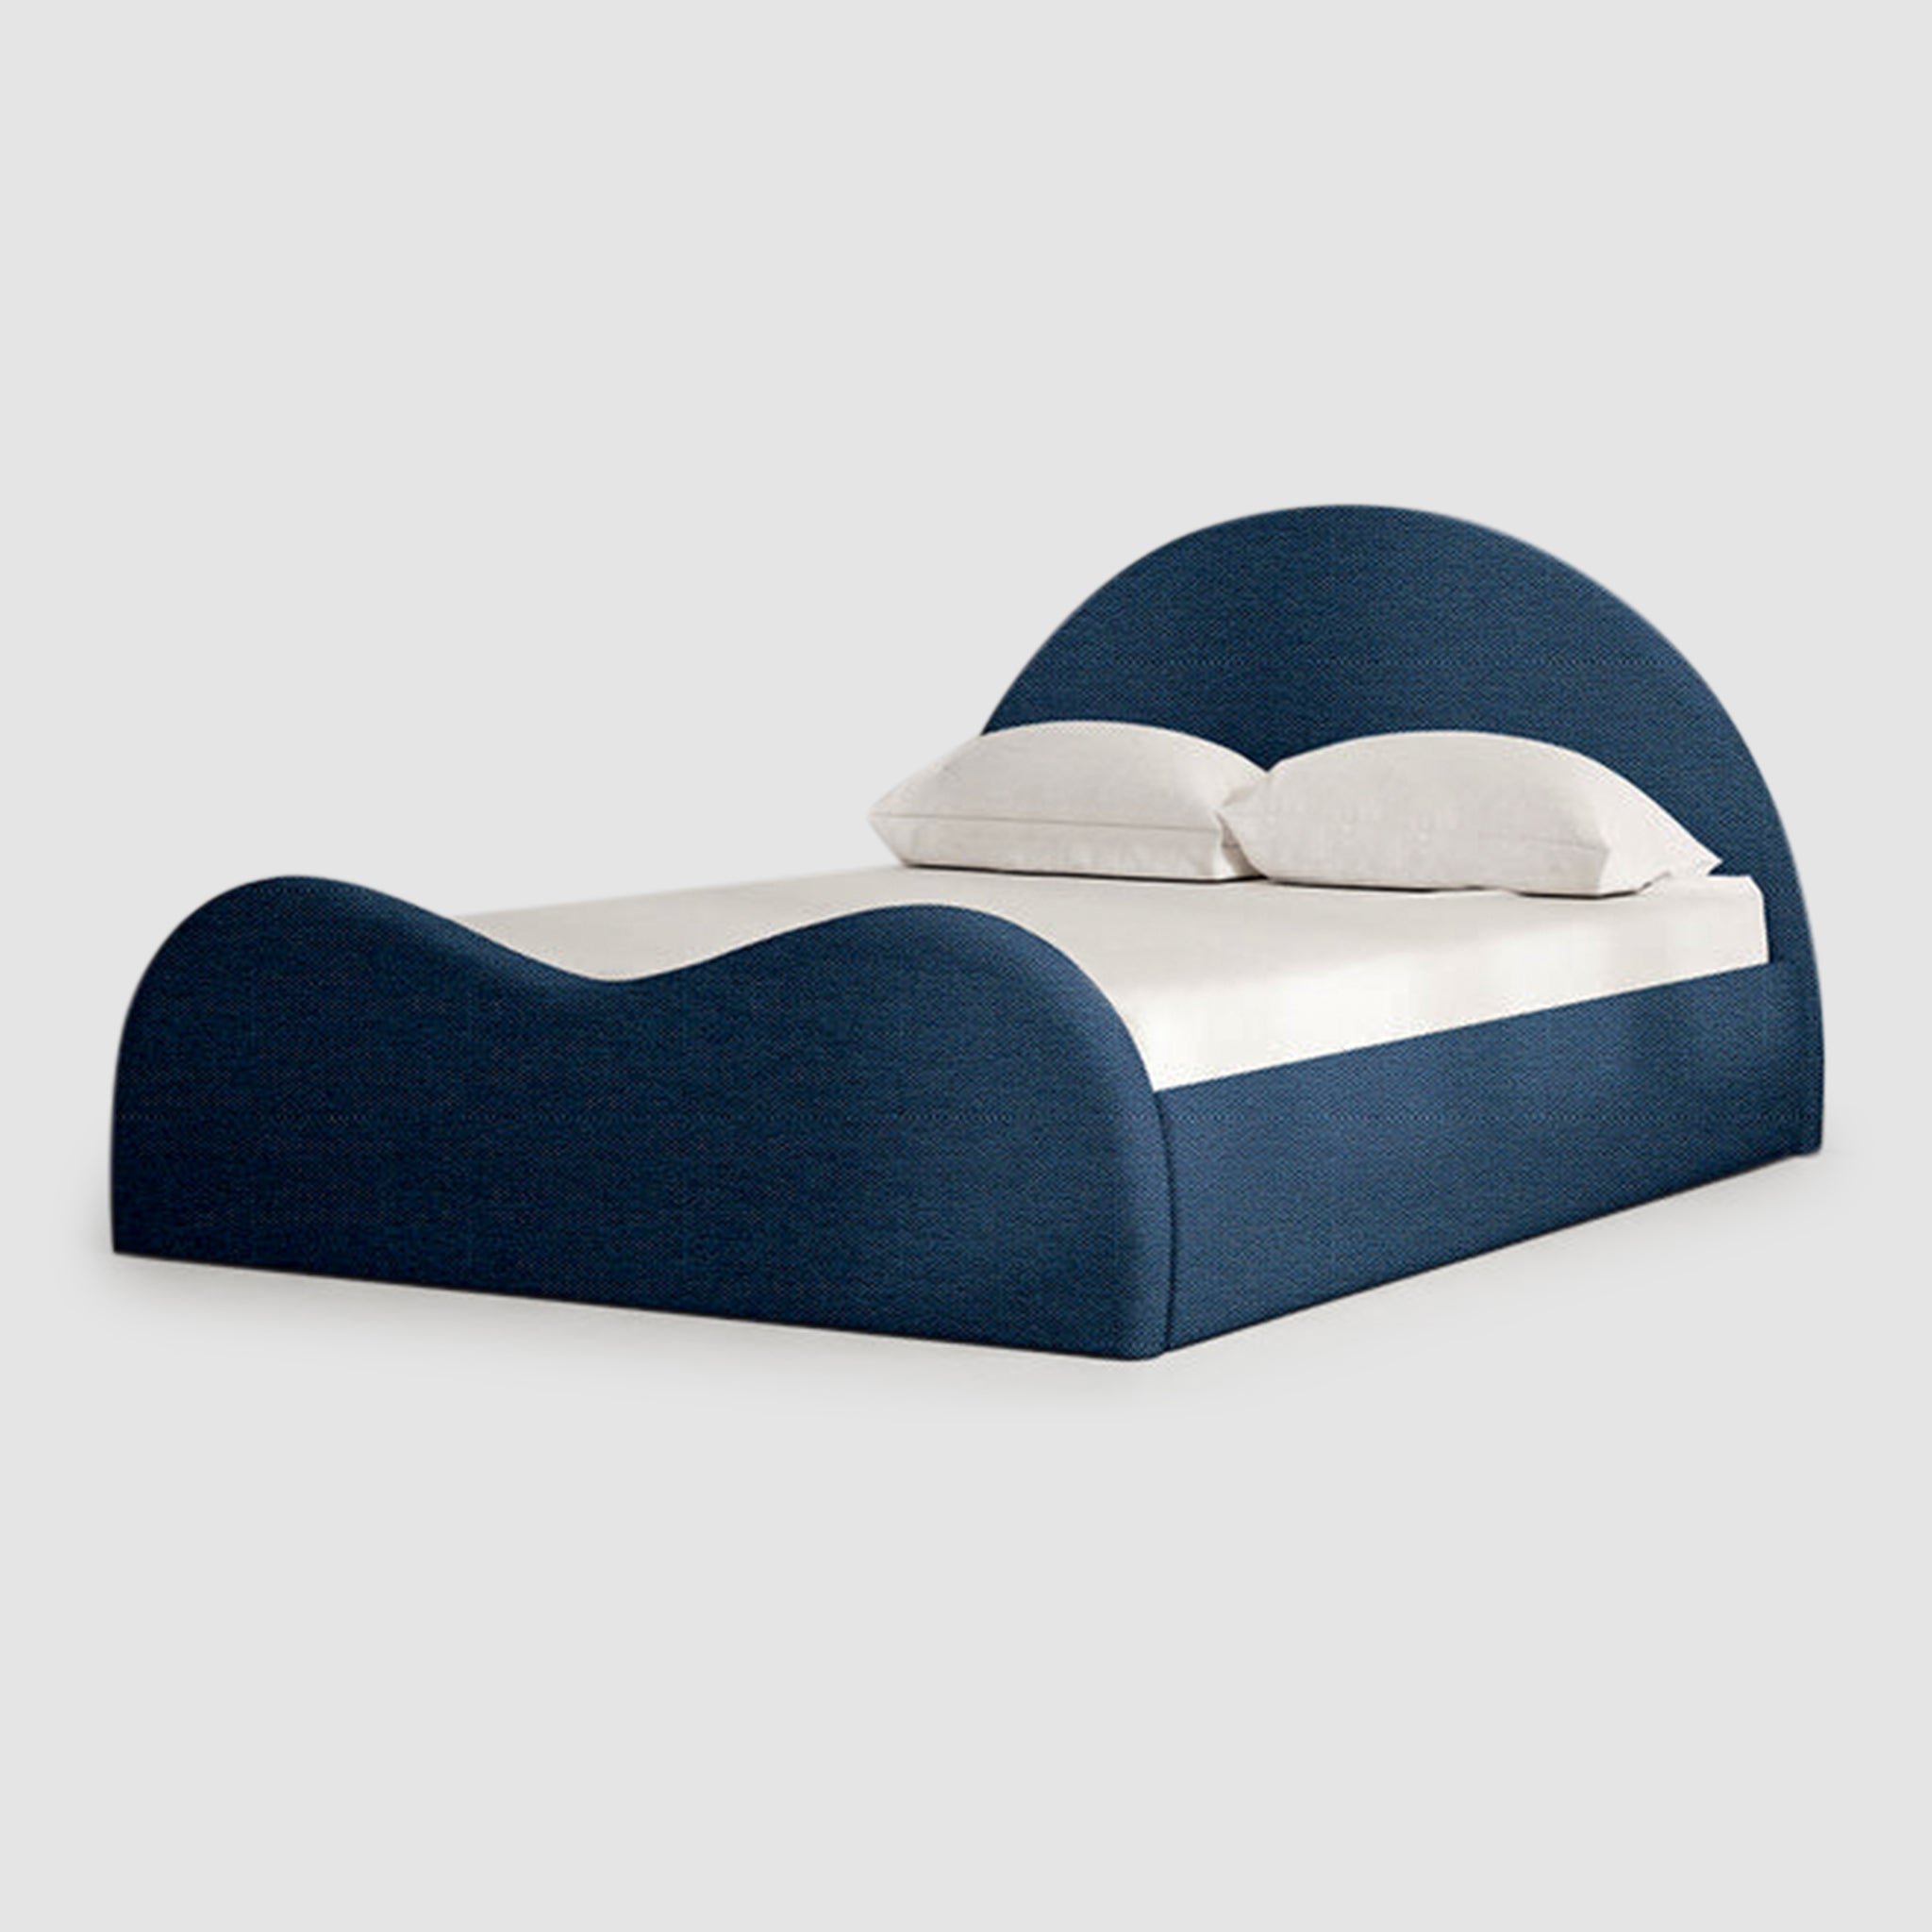 The Dolly Bed in elegant blue with curved headboard and footboard.